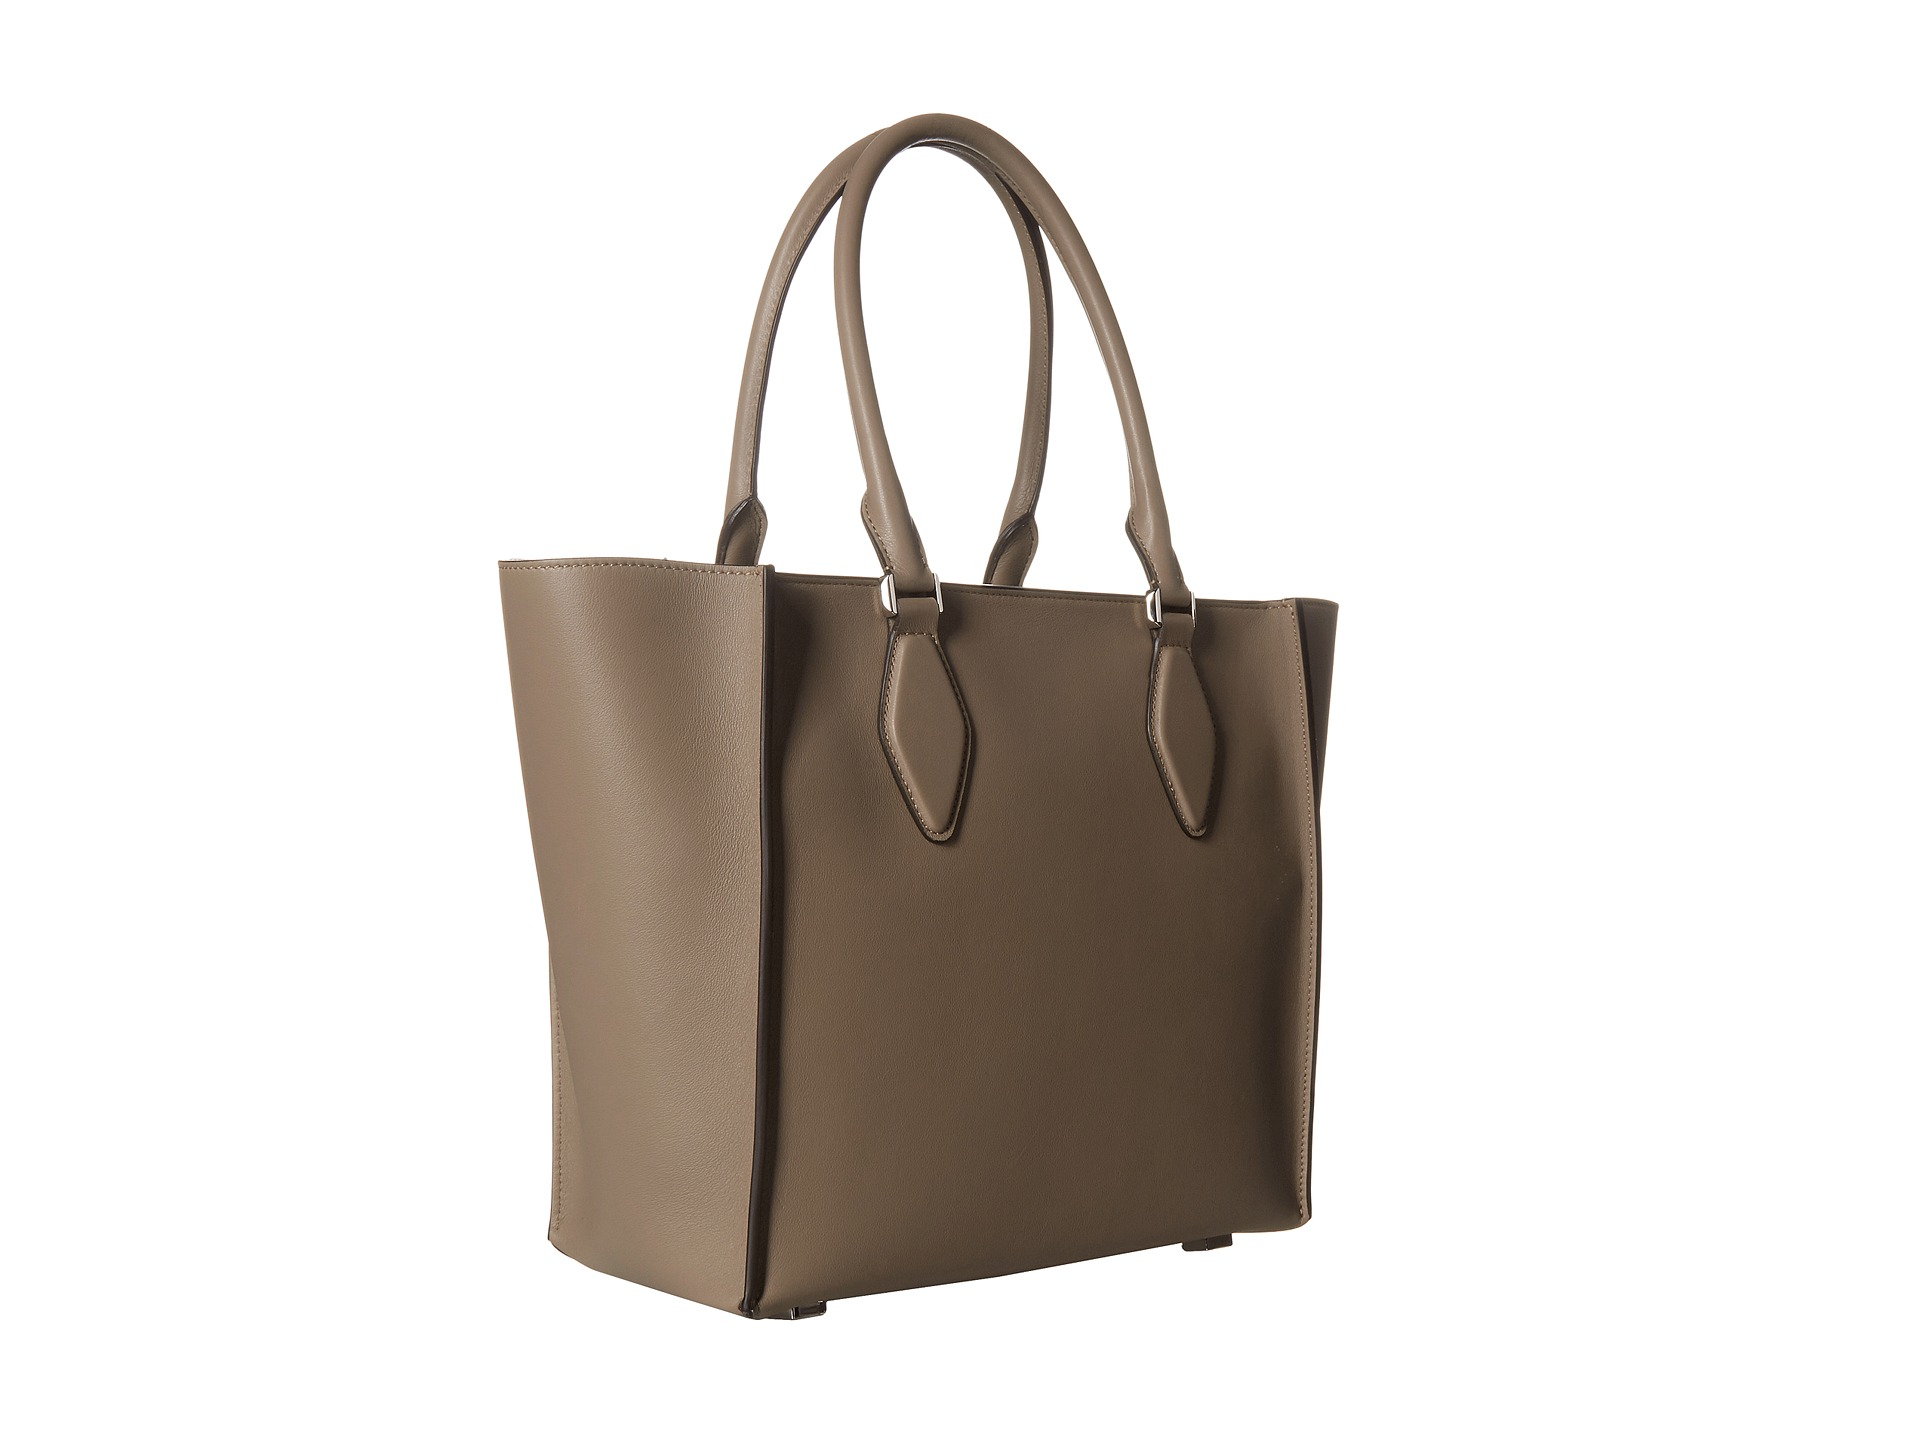 Balehval Inspirere Ægte Michael Kors Gracie Large Tote in Dark Taupe (Brown) - Lyst